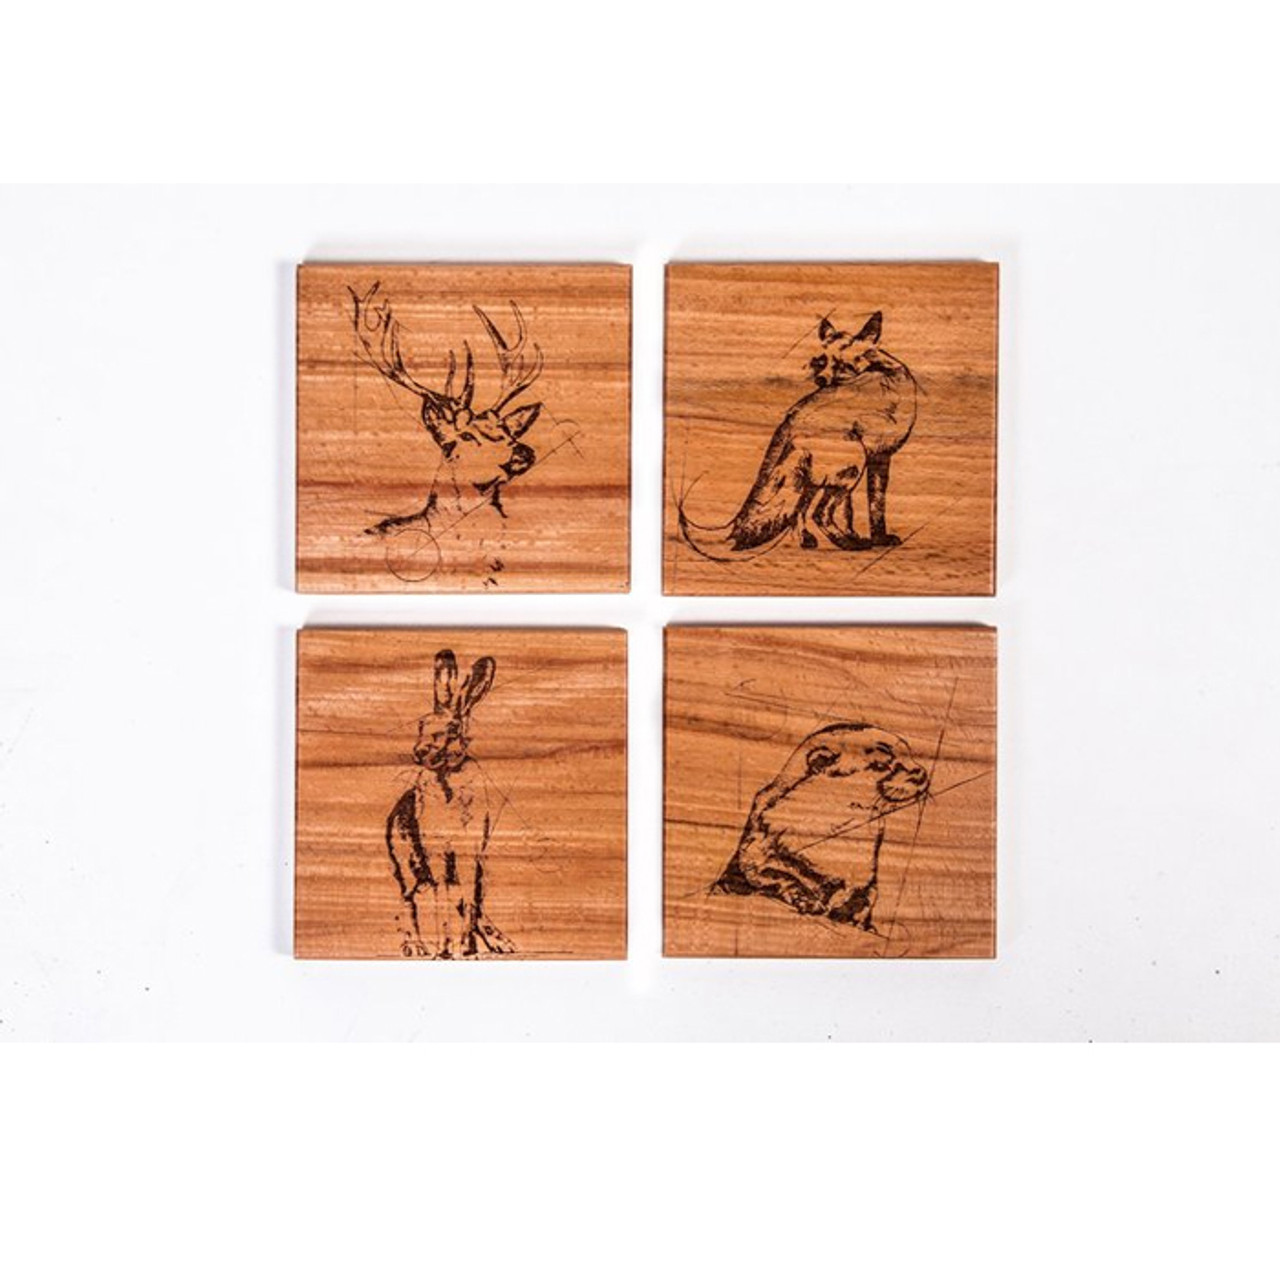 The Native Collection Coasters ( Set of 4)*in-store